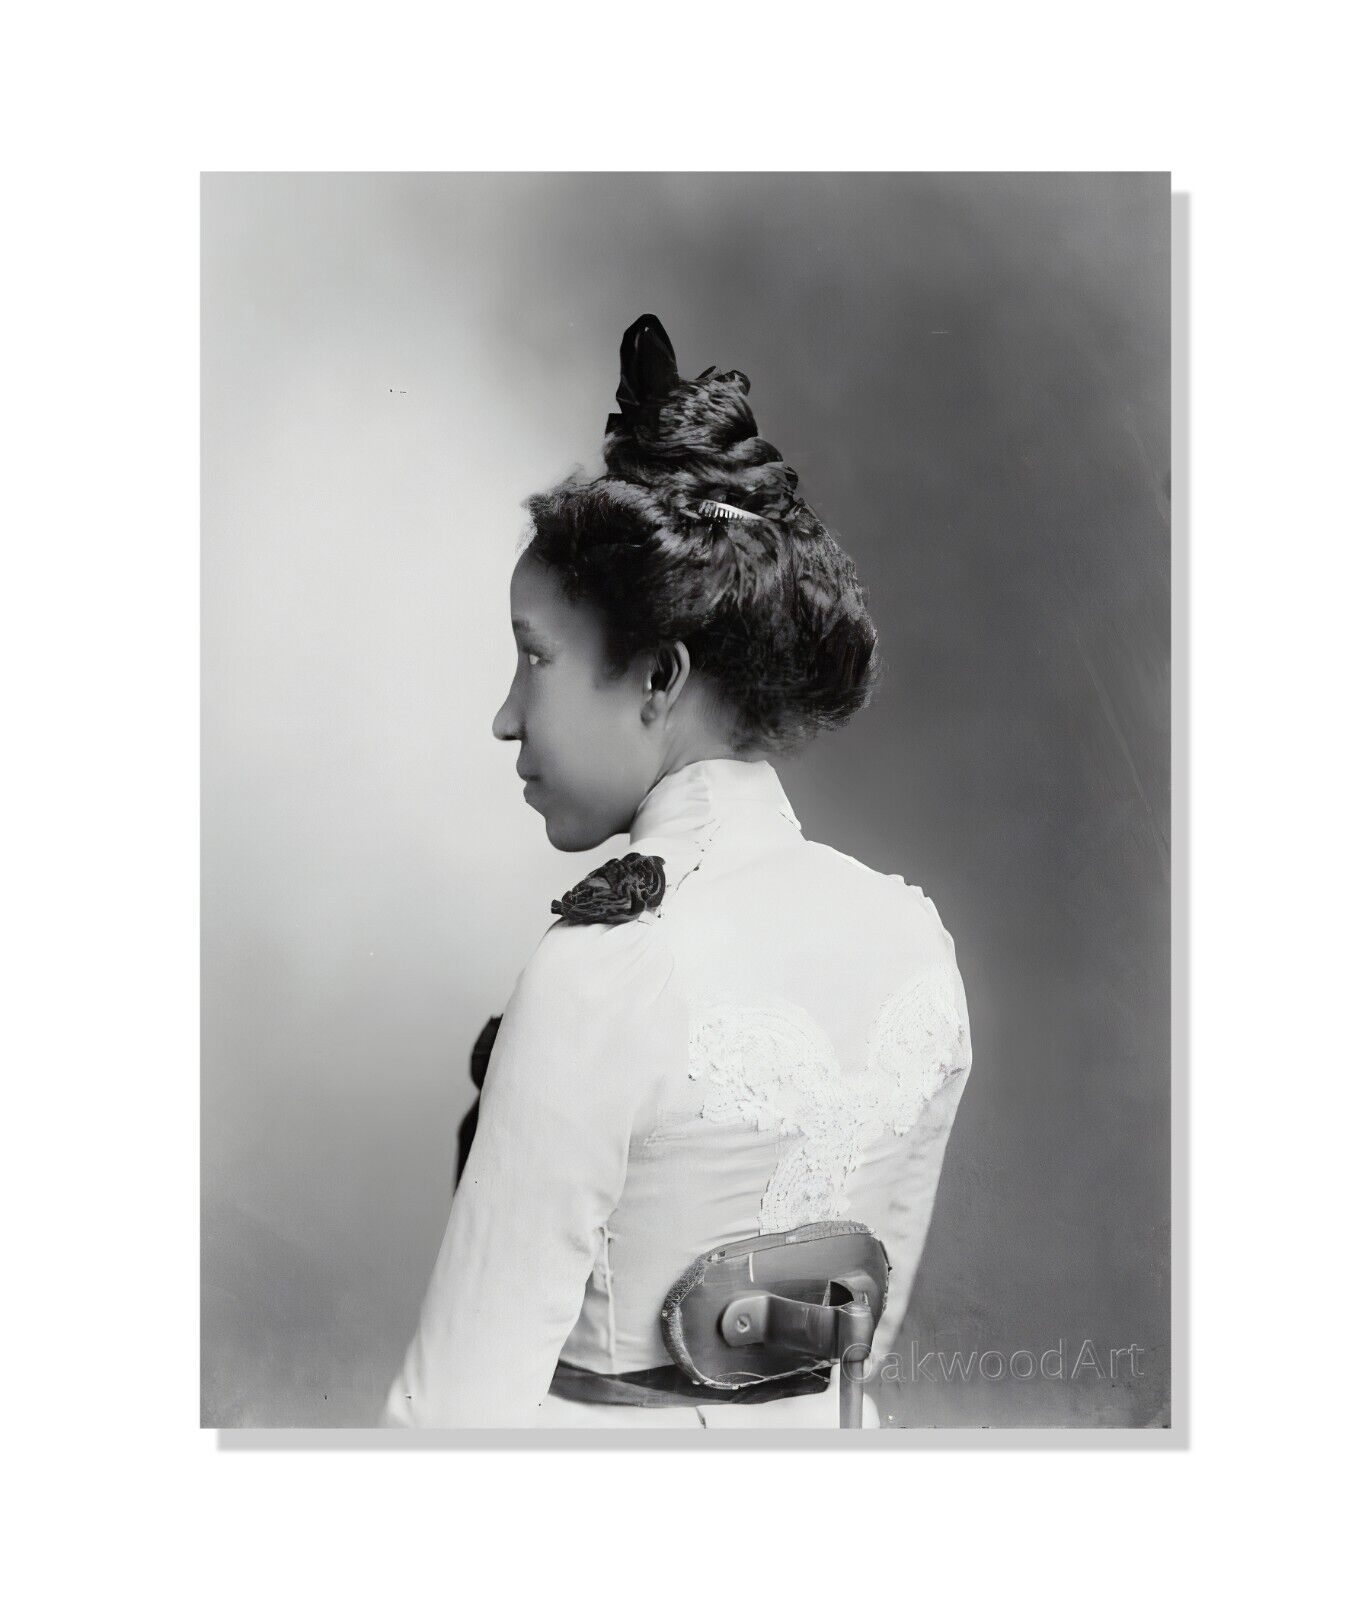 1890s Black Woman's Victorian Hairstyle, Rear View, Vintage Photo Reprint